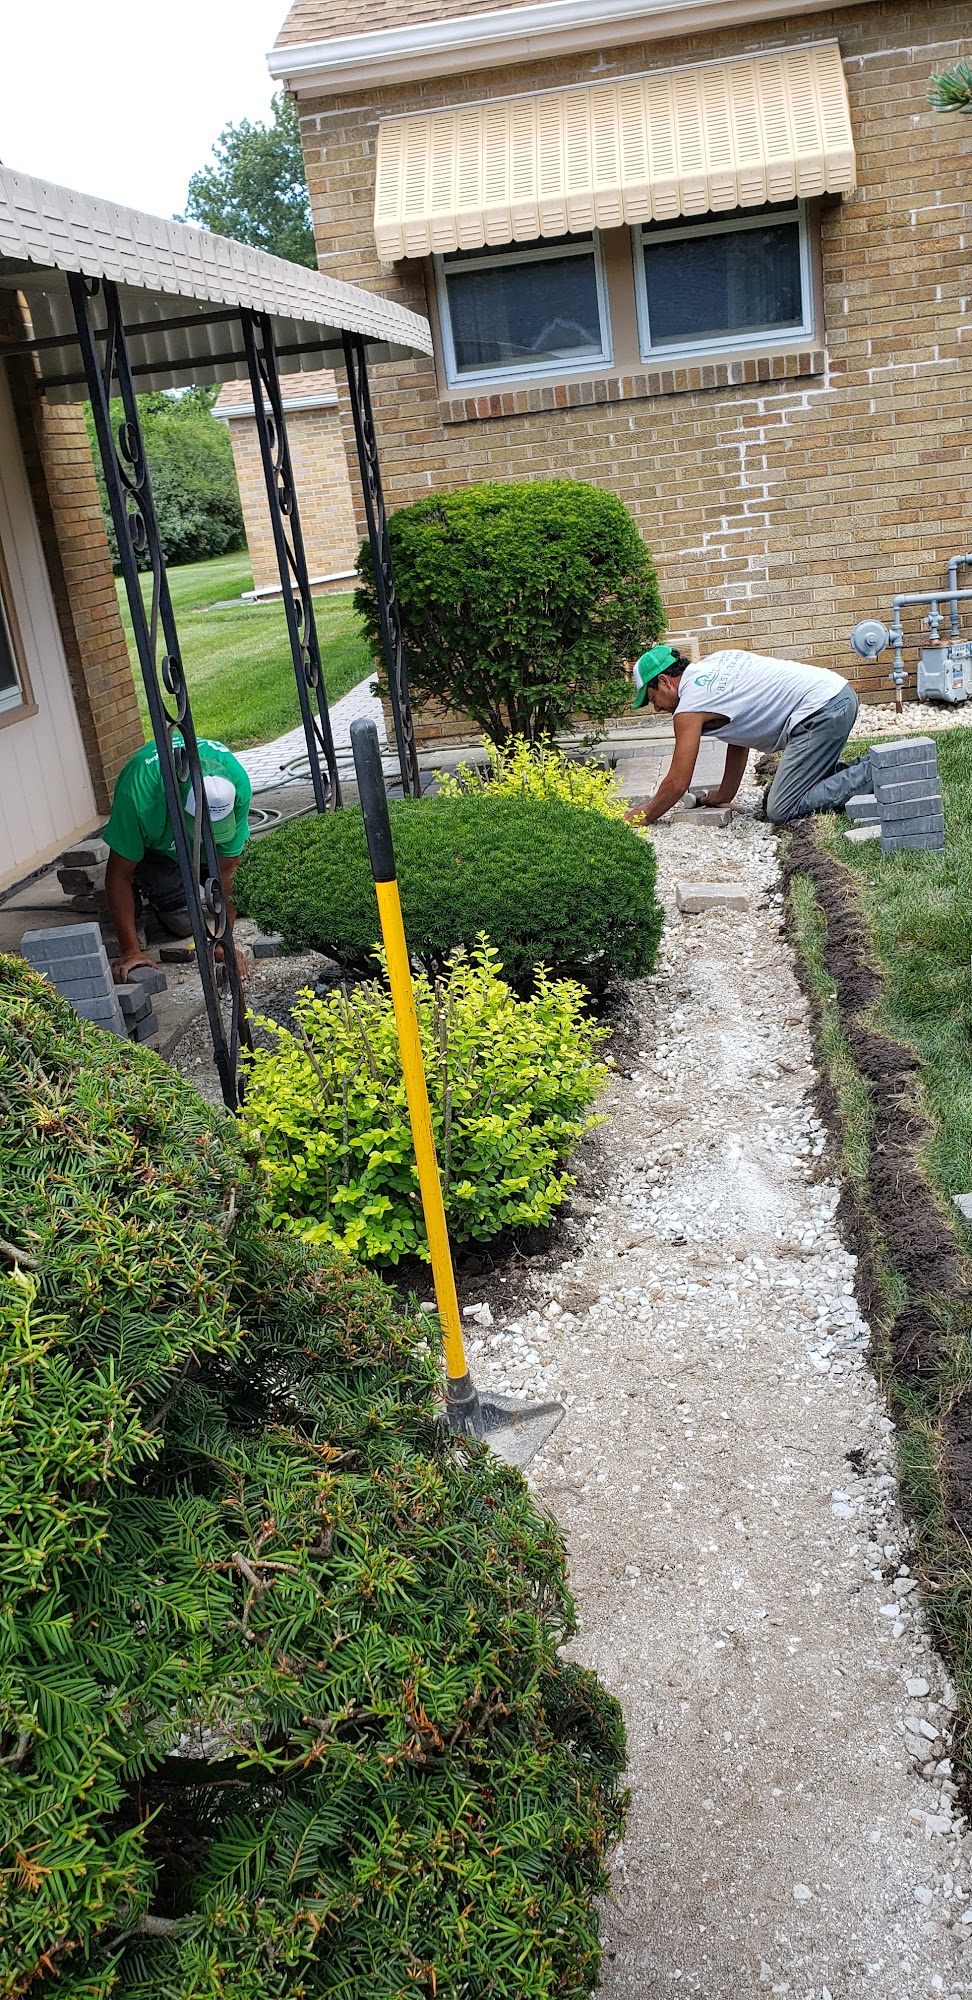 River Landscaping & Tree Service 35028 1600 N Ave, Ladd Illinois 61329